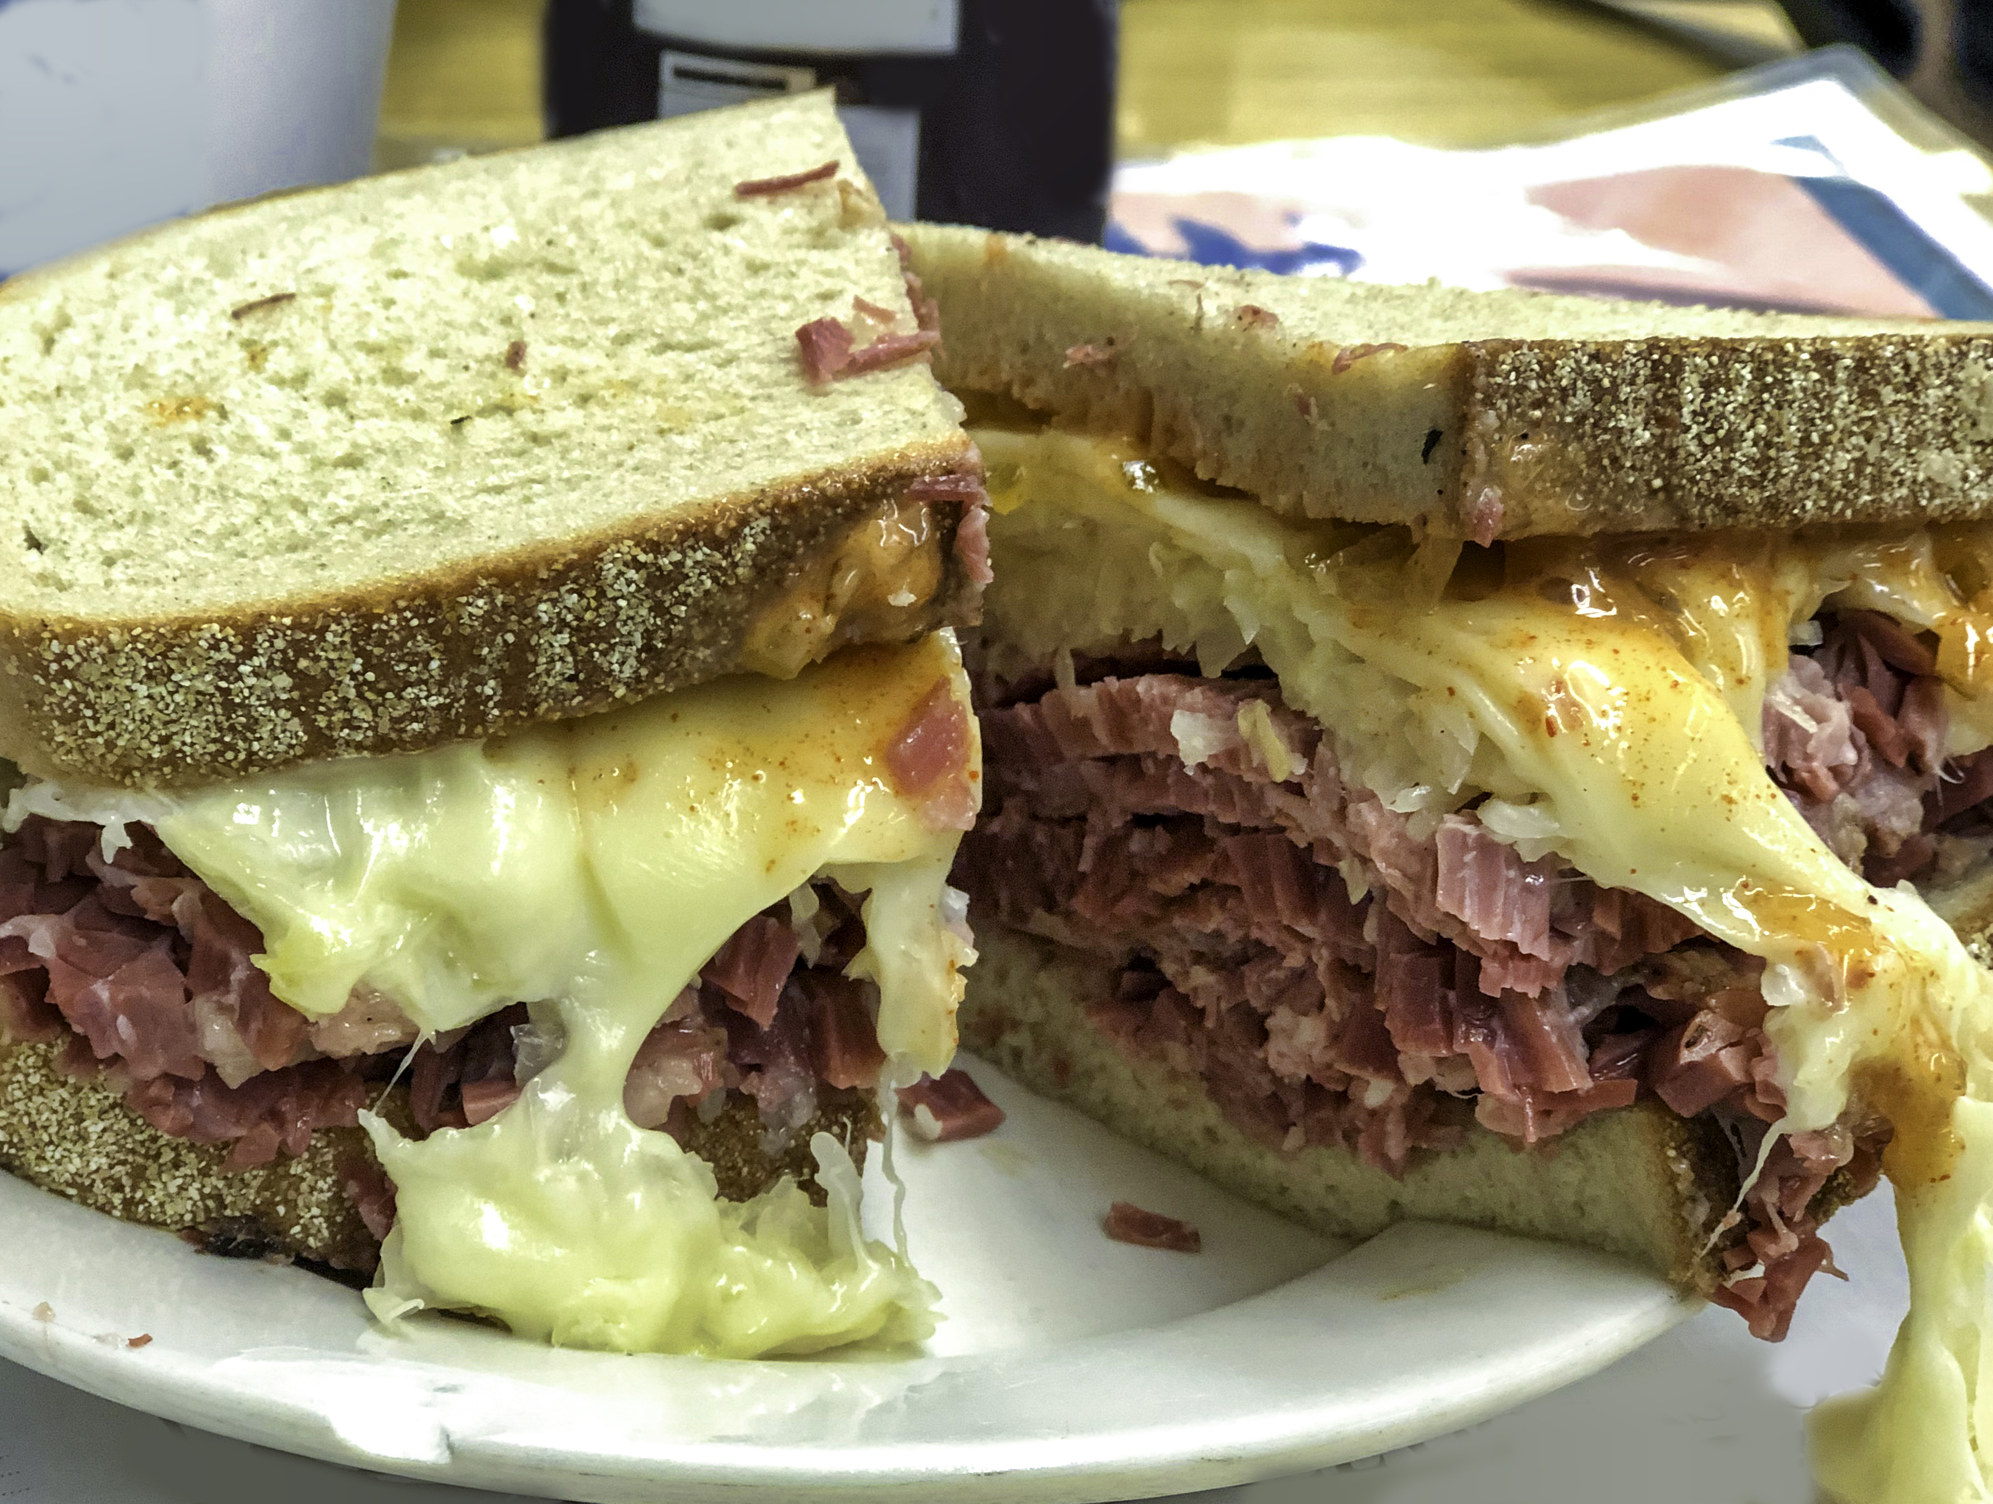 Pastrami sandwich with cheese.